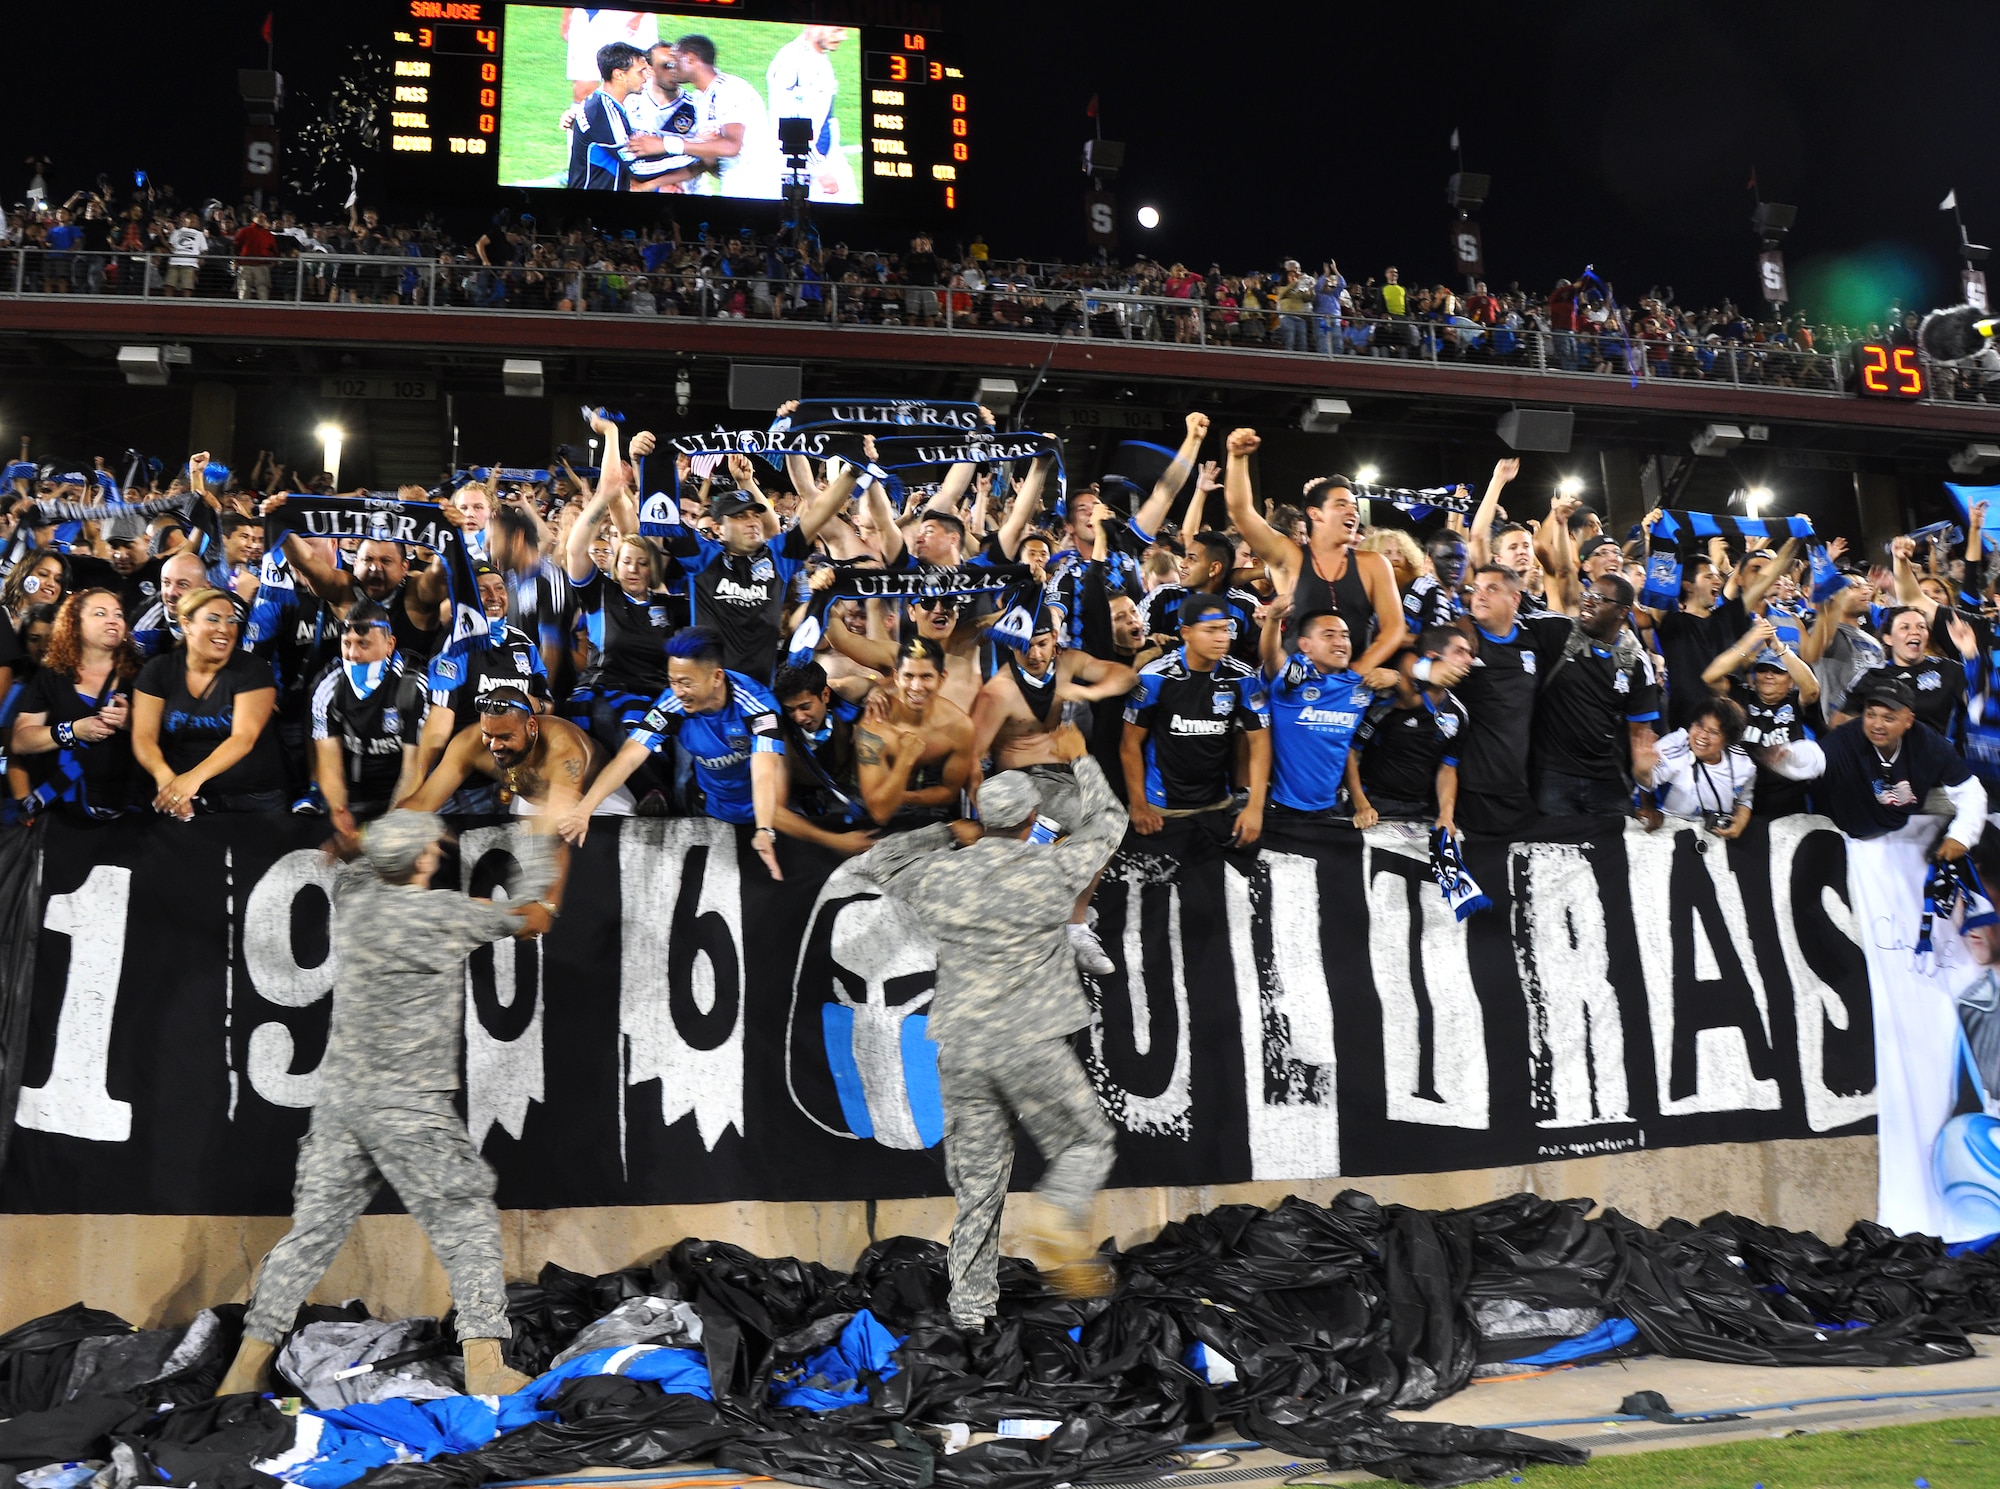 U.S. servicemembers celebrate with San Jose Earthquakes fans after the team’s 4-3 win over the L.A. Galaxy at Stanford Stadium, Stanford, Calif., June 30, 2012. The military appreciation game featured a halftime marching performance from every service. (U.S. Air Force photo by Staff Sgt. Robert M. Trujillo/Released)